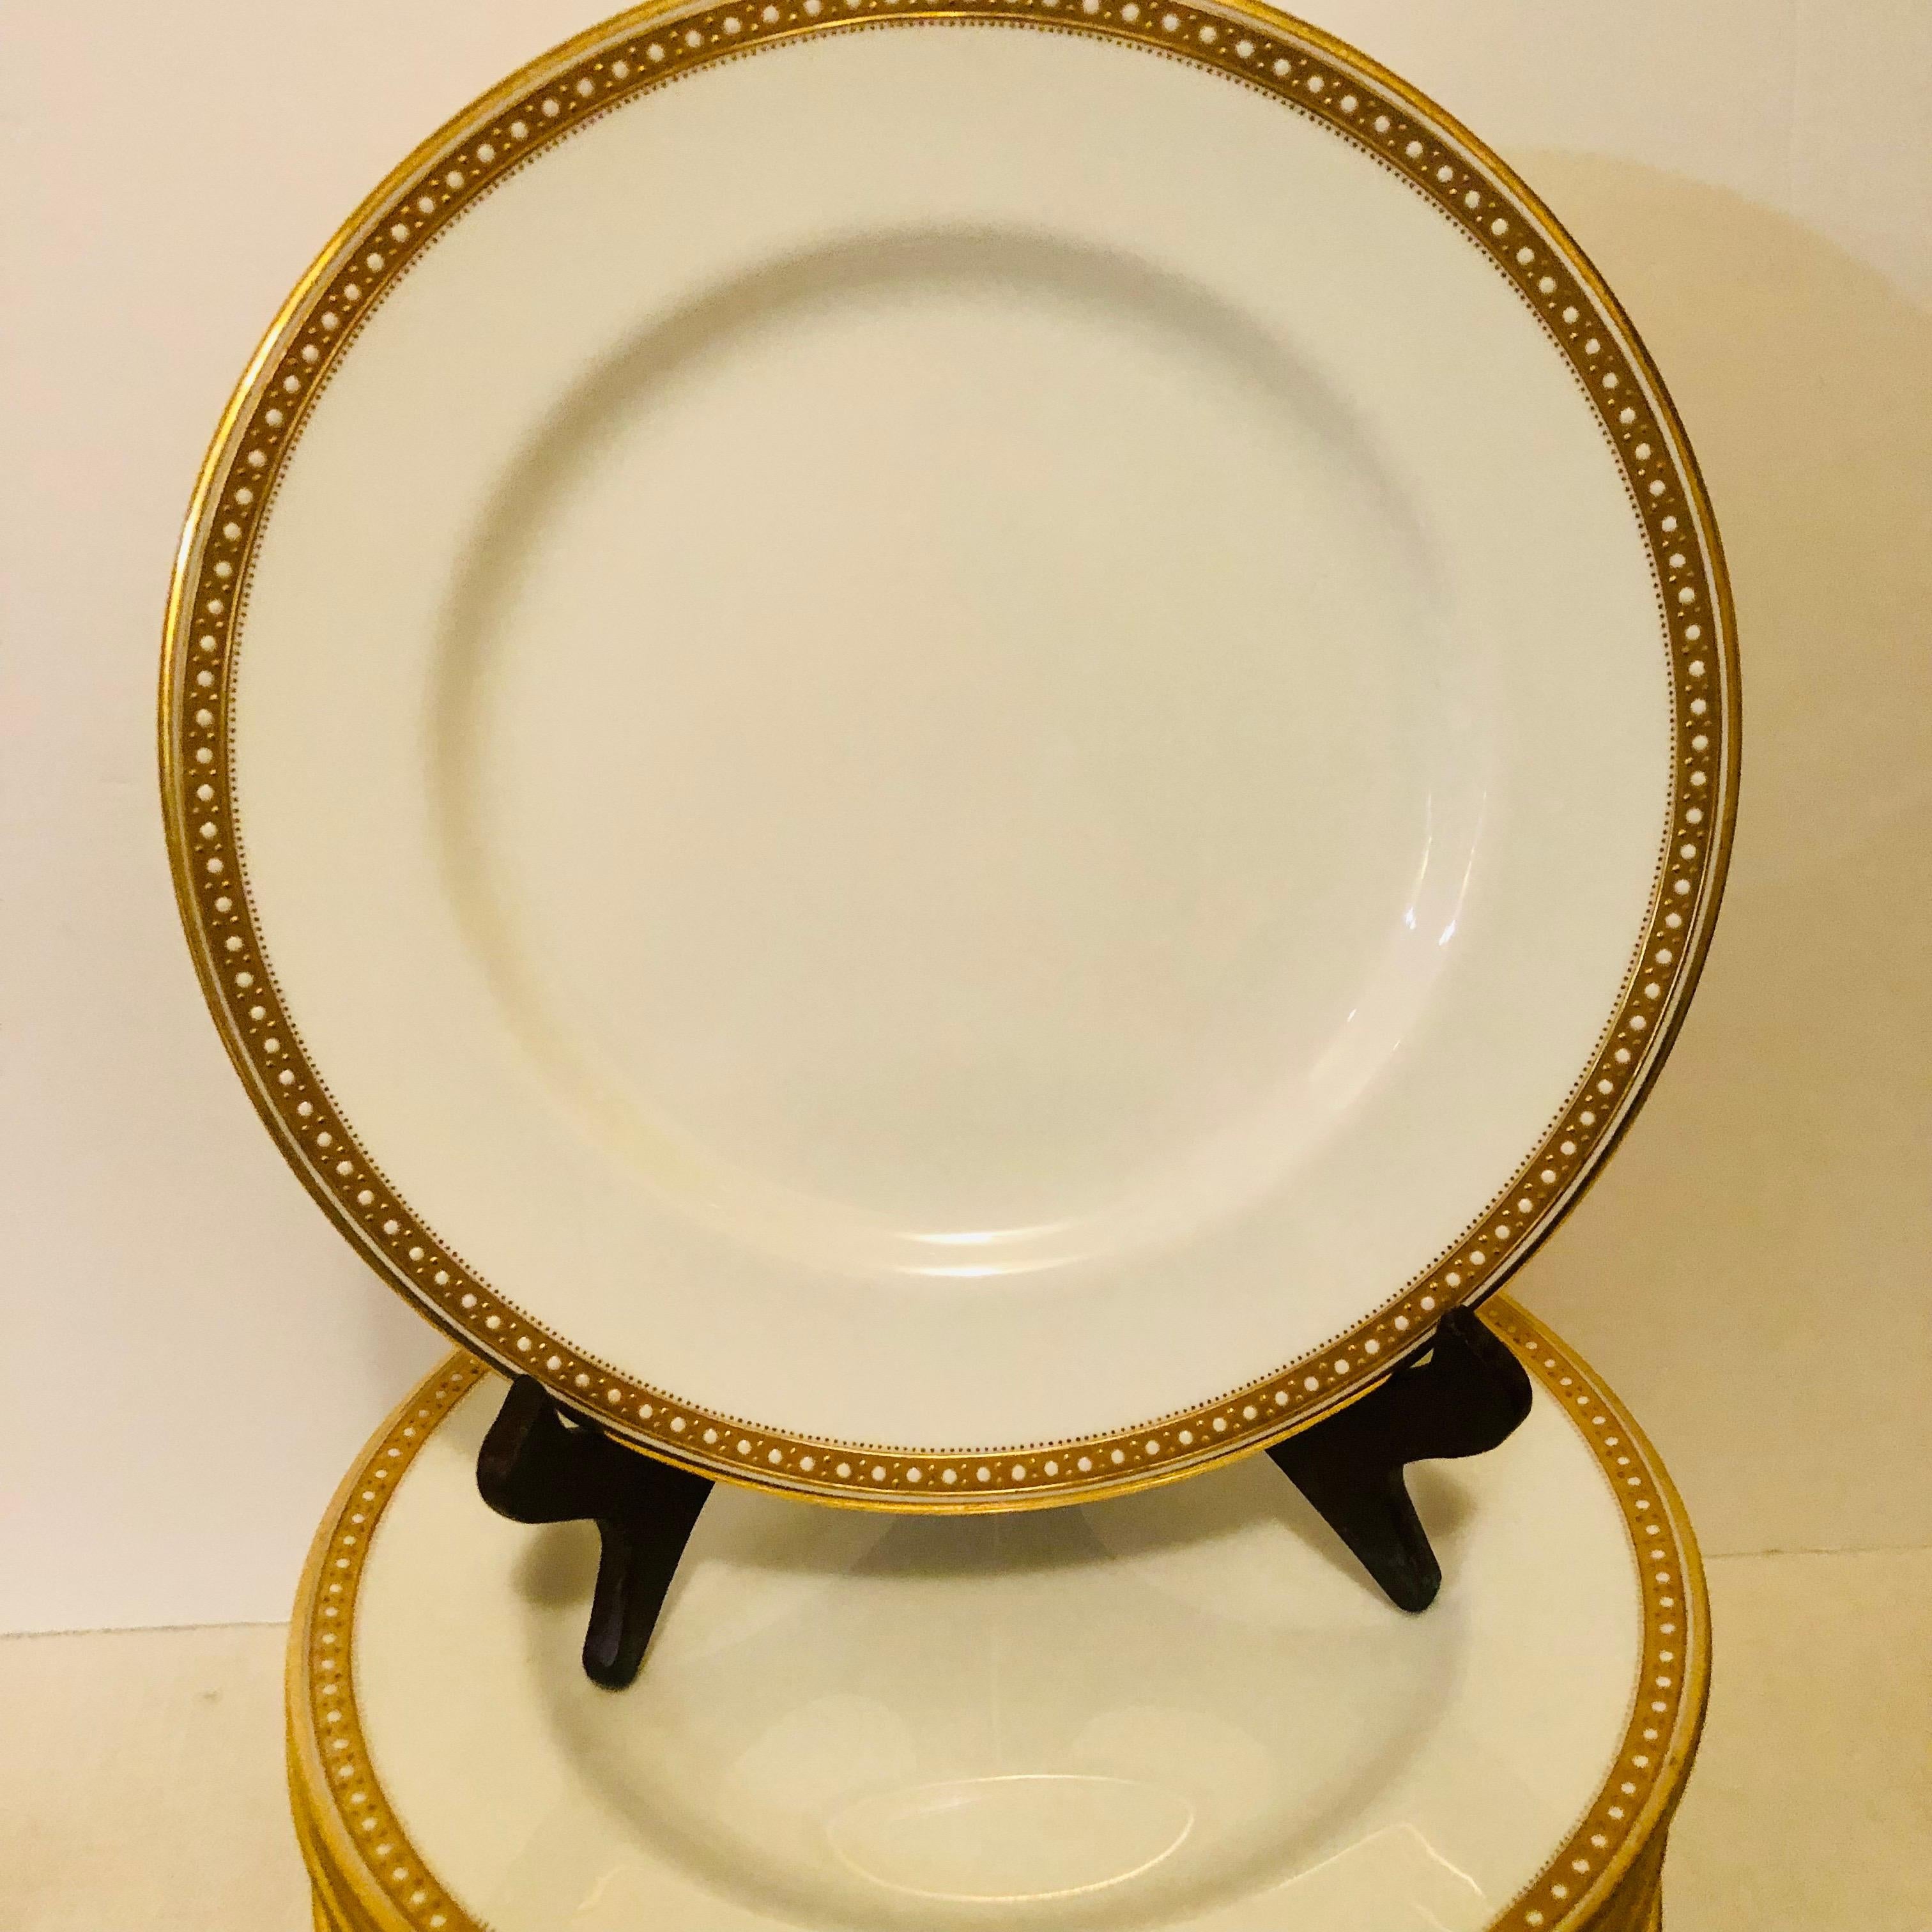 Gilt Set of 6 Copeland Spode Dinner Plates With Gold Borders and White Jeweling 